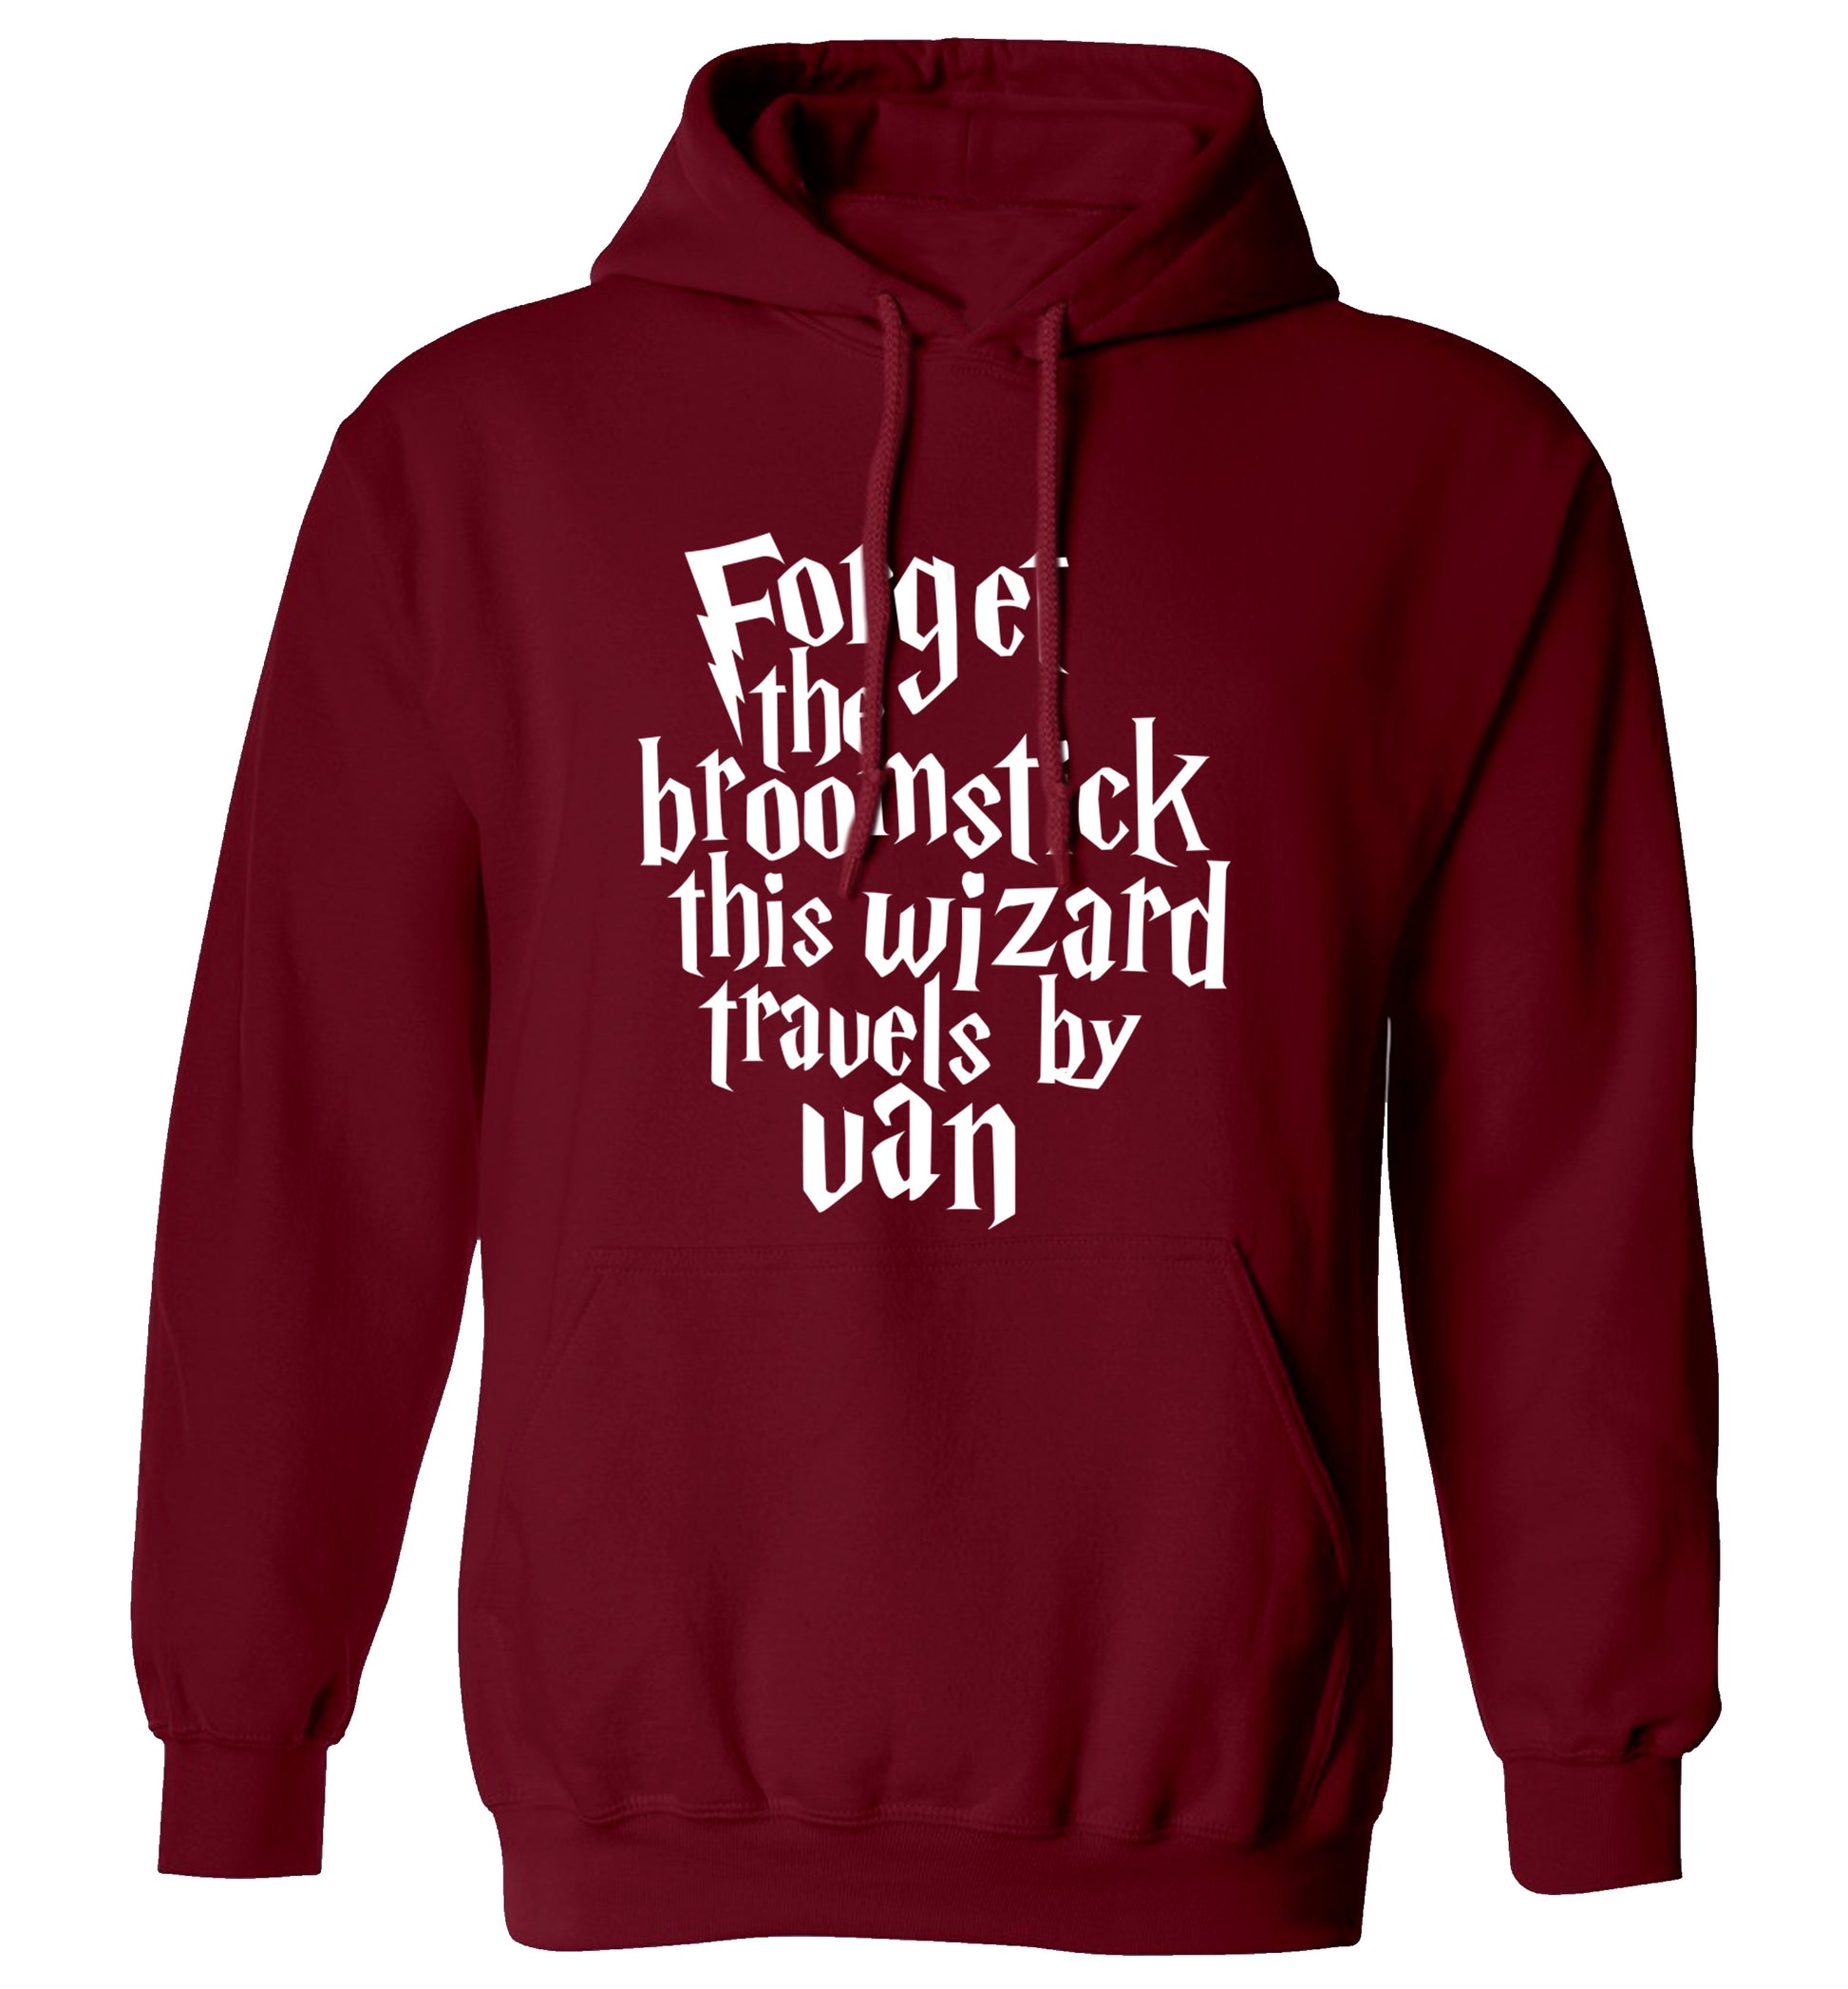 Forget the broomstick this wizard travels by van adults unisexmaroon hoodie 2XL